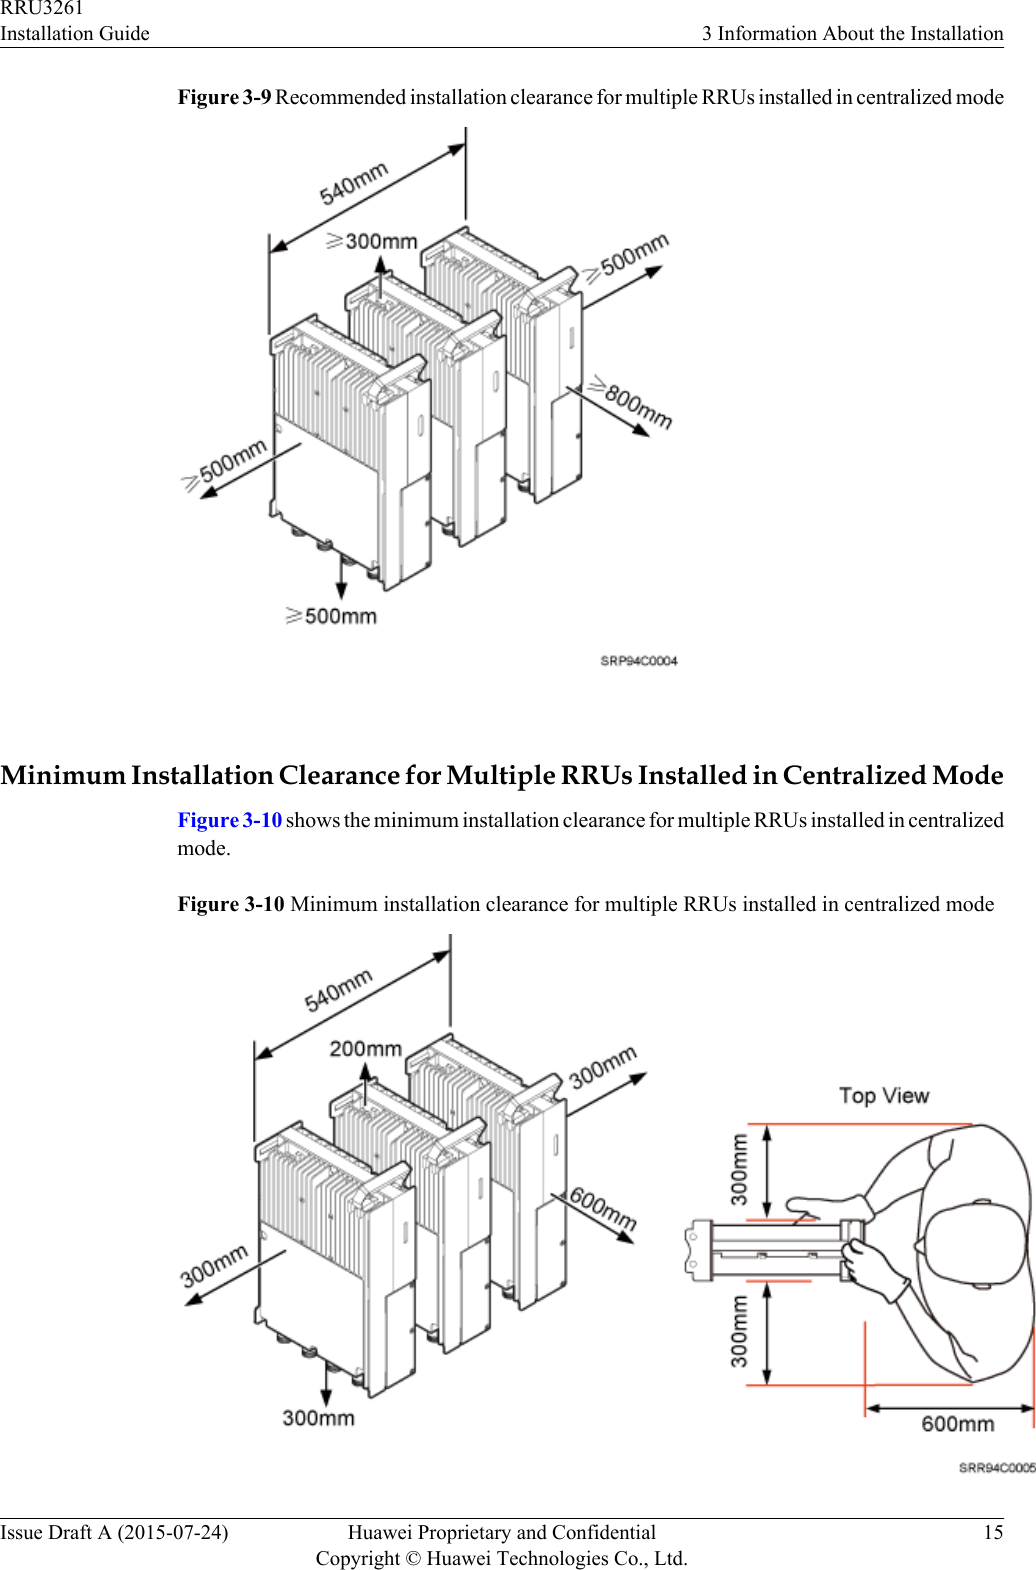 Figure 3-9 Recommended installation clearance for multiple RRUs installed in centralized mode Minimum Installation Clearance for Multiple RRUs Installed in Centralized ModeFigure 3-10 shows the minimum installation clearance for multiple RRUs installed in centralizedmode.Figure 3-10 Minimum installation clearance for multiple RRUs installed in centralized modeRRU3261Installation Guide 3 Information About the InstallationIssue Draft A (2015-07-24) Huawei Proprietary and ConfidentialCopyright © Huawei Technologies Co., Ltd.15